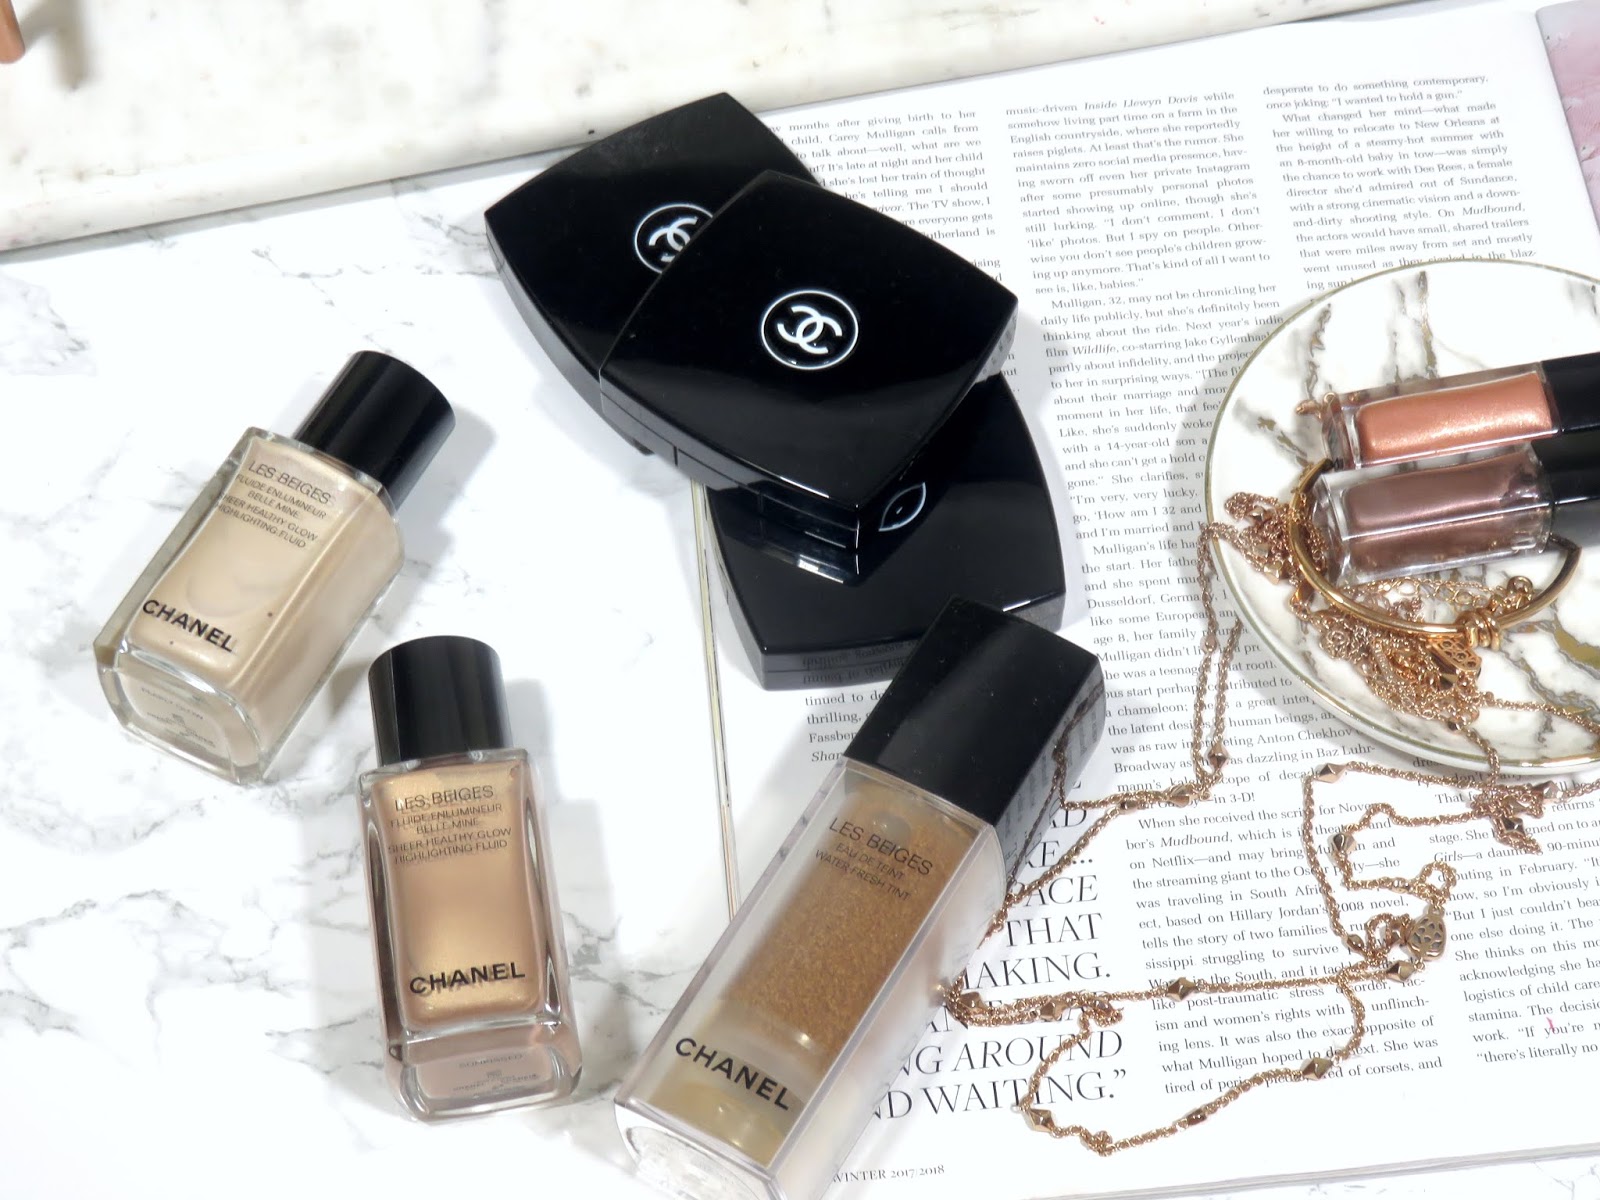 Review  Chanel LES BEIGES Sheer Healthy Glow Highlighting Fluid